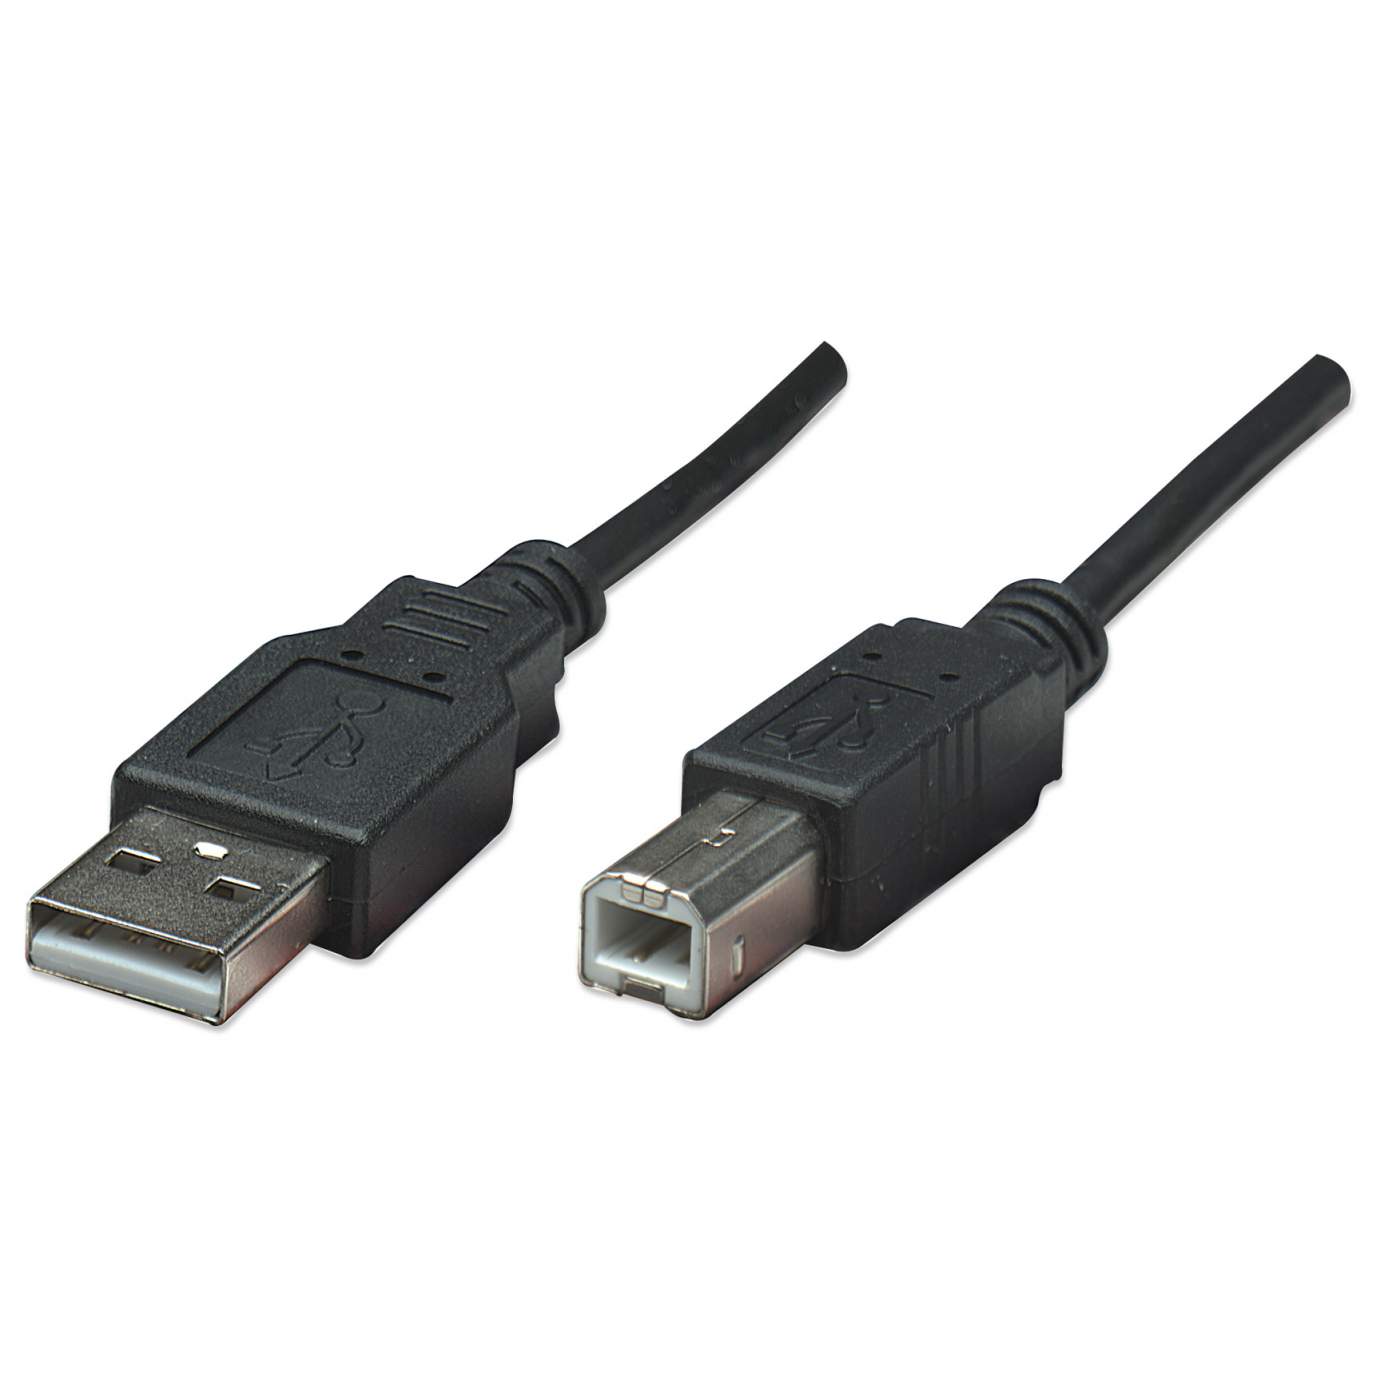 Hi-Speed USB B Device Cable Image 1